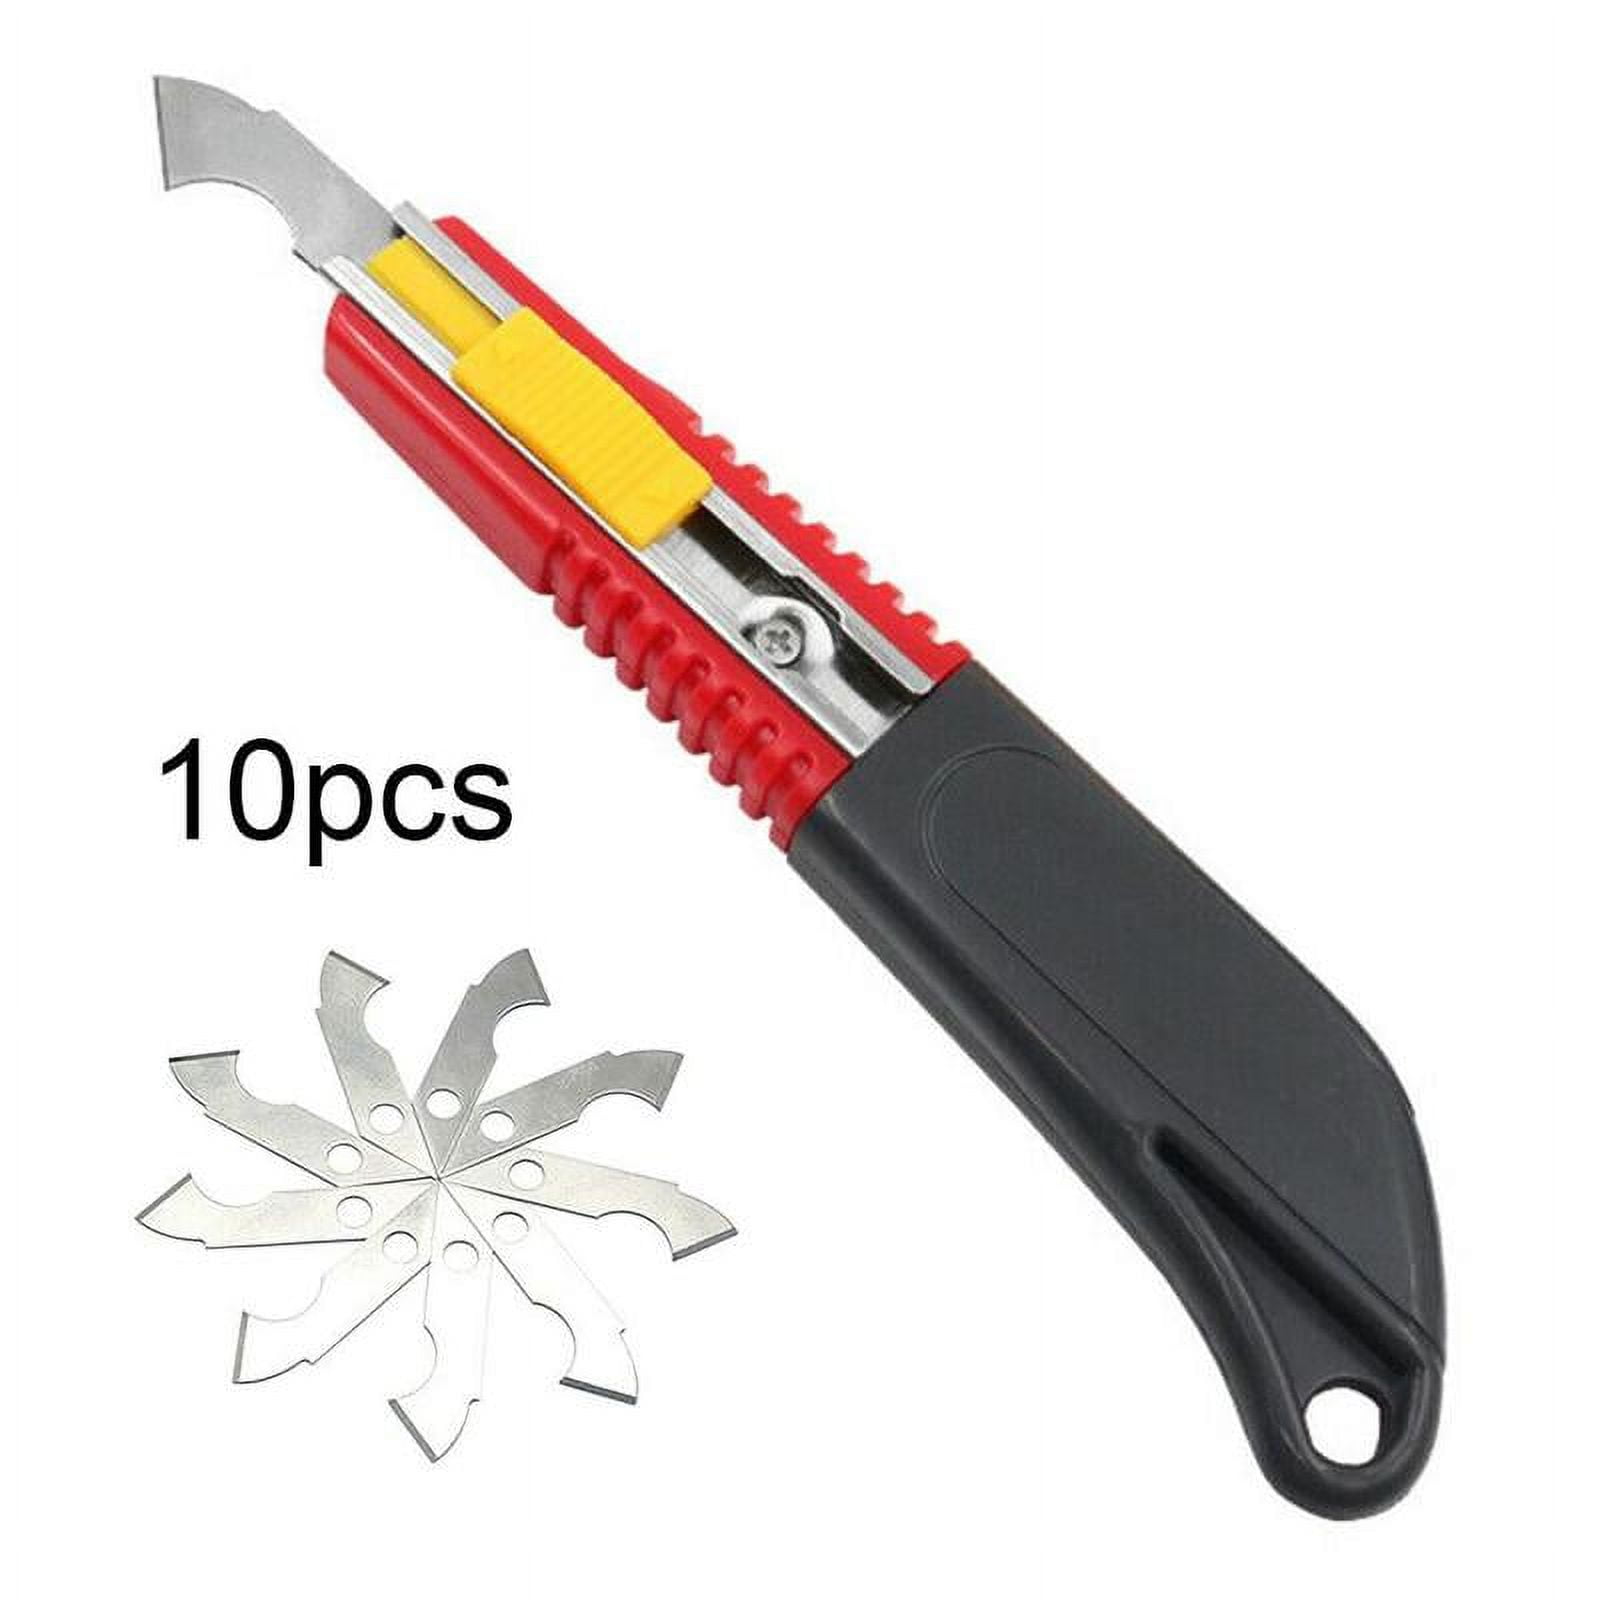 Details about Acrylic Plastic Sheet Cutter Hook Cutting Tool Blades Hot